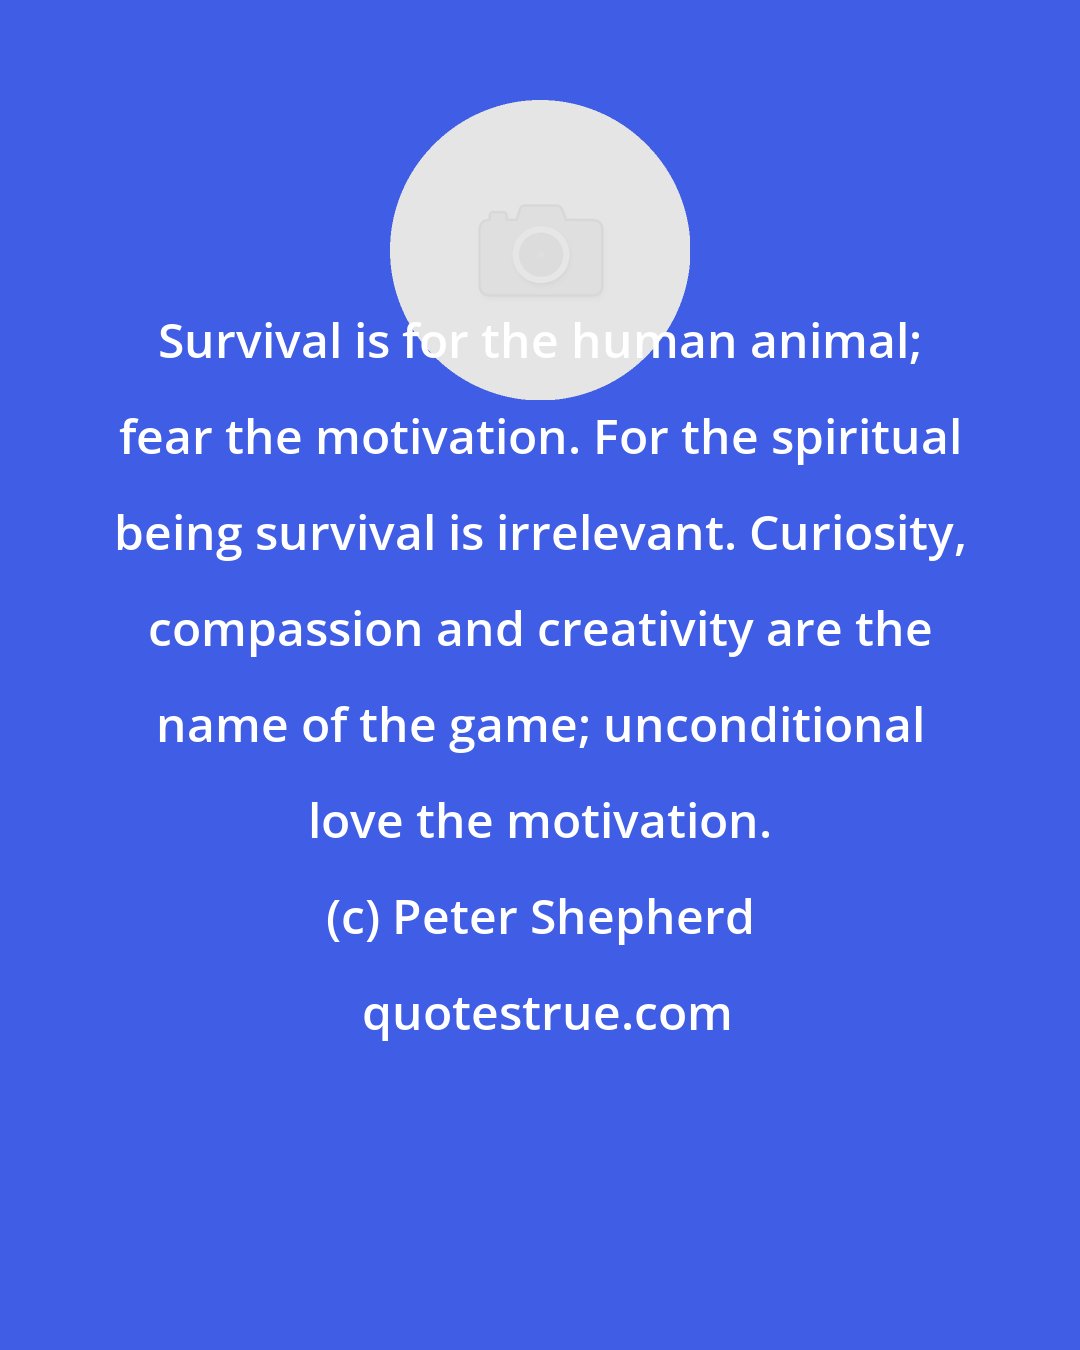 Peter Shepherd: Survival is for the human animal; fear the motivation. For the spiritual being survival is irrelevant. Curiosity, compassion and creativity are the name of the game; unconditional love the motivation.